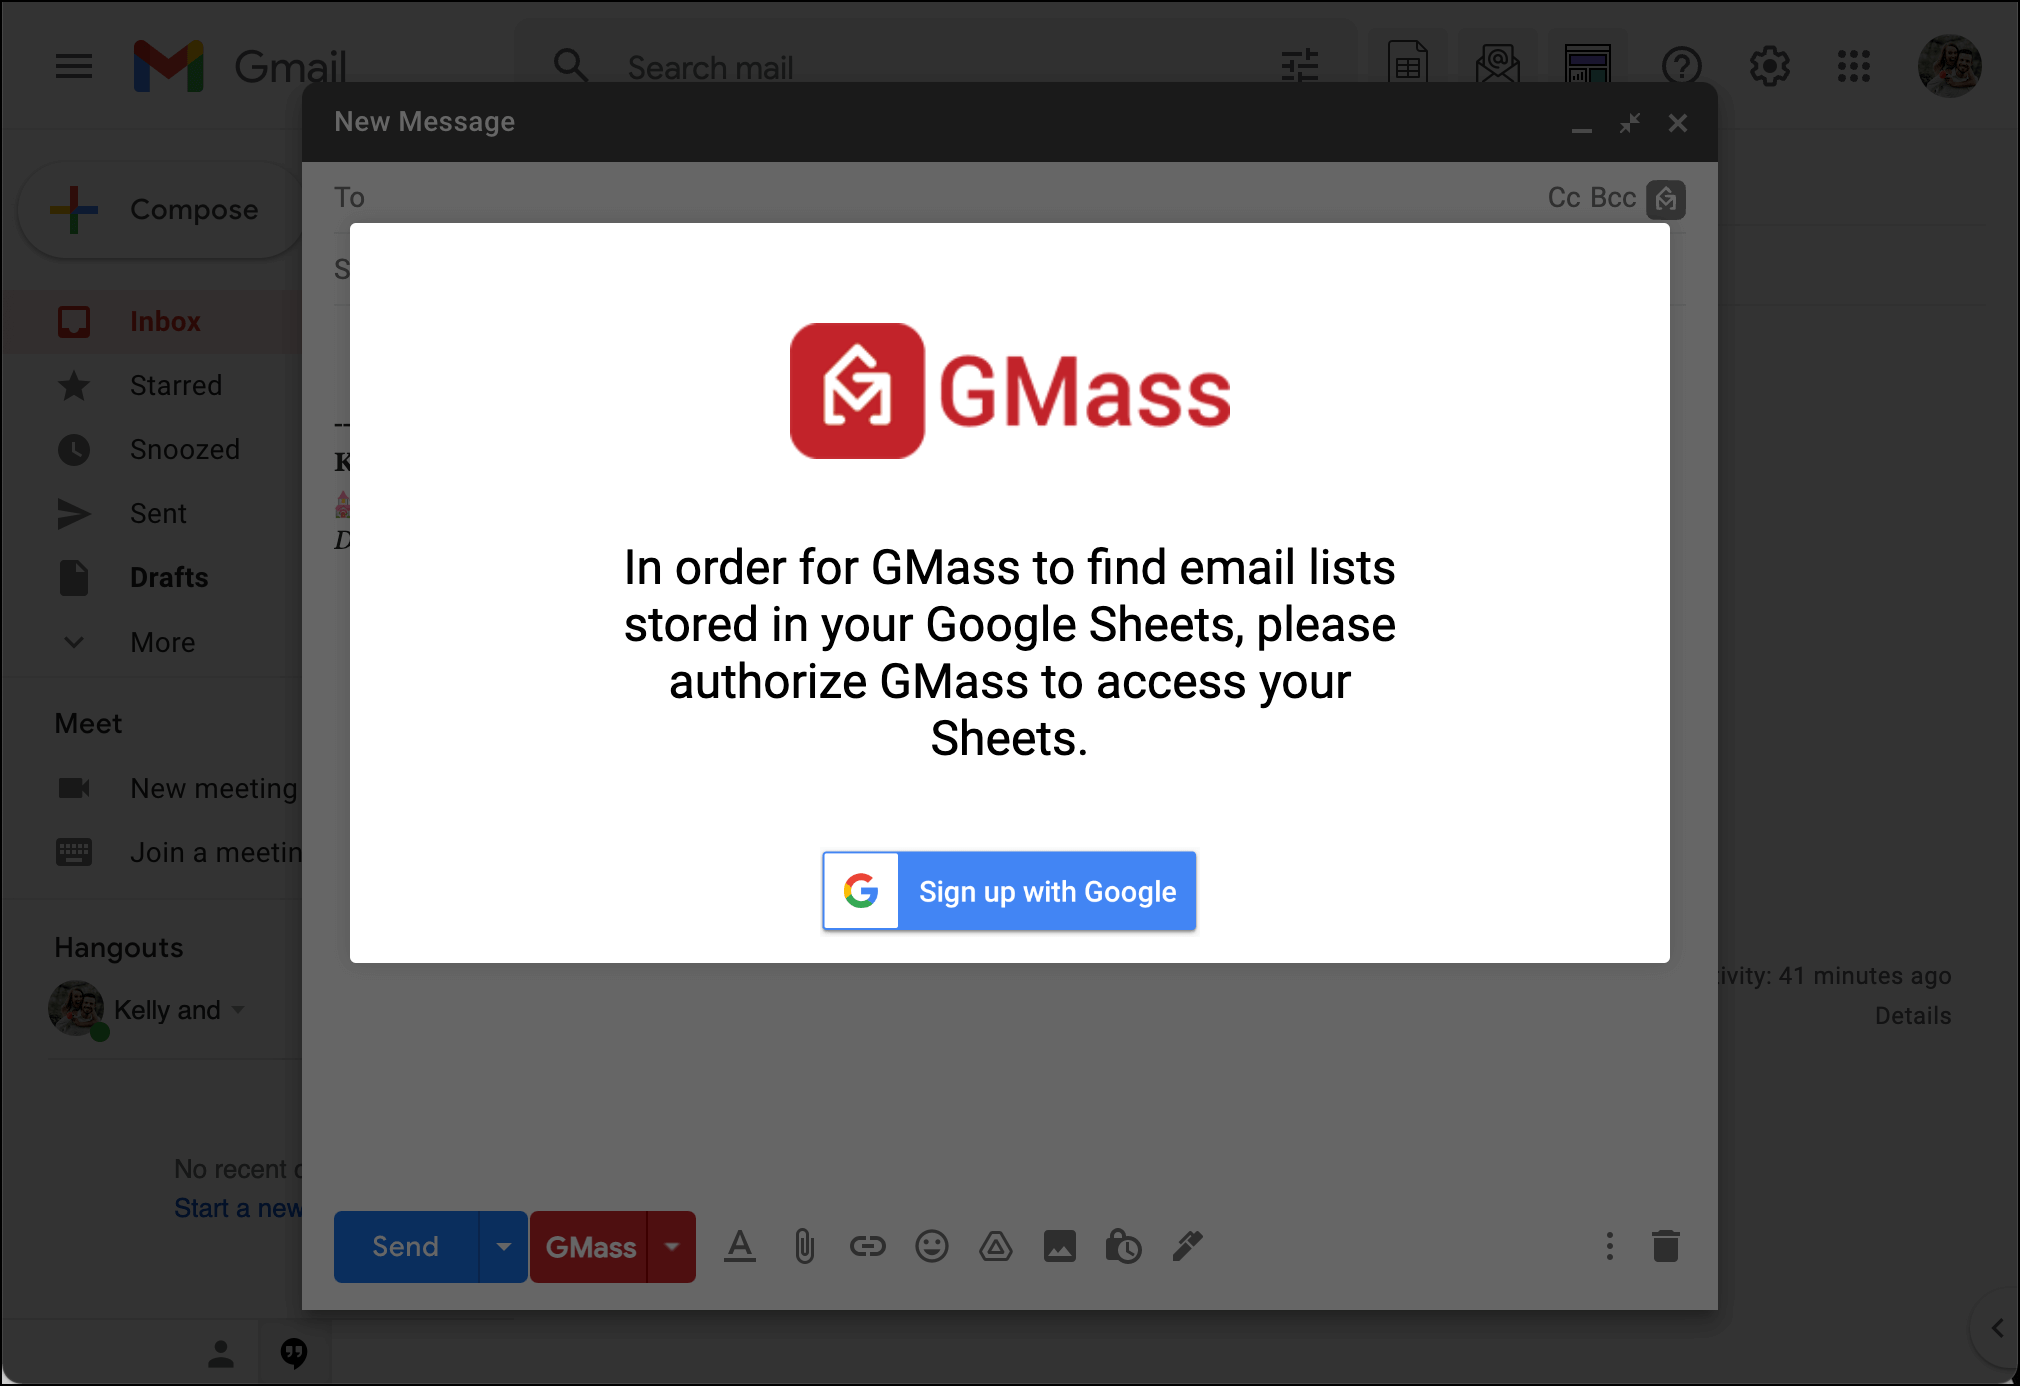 Give GMass permission to connect